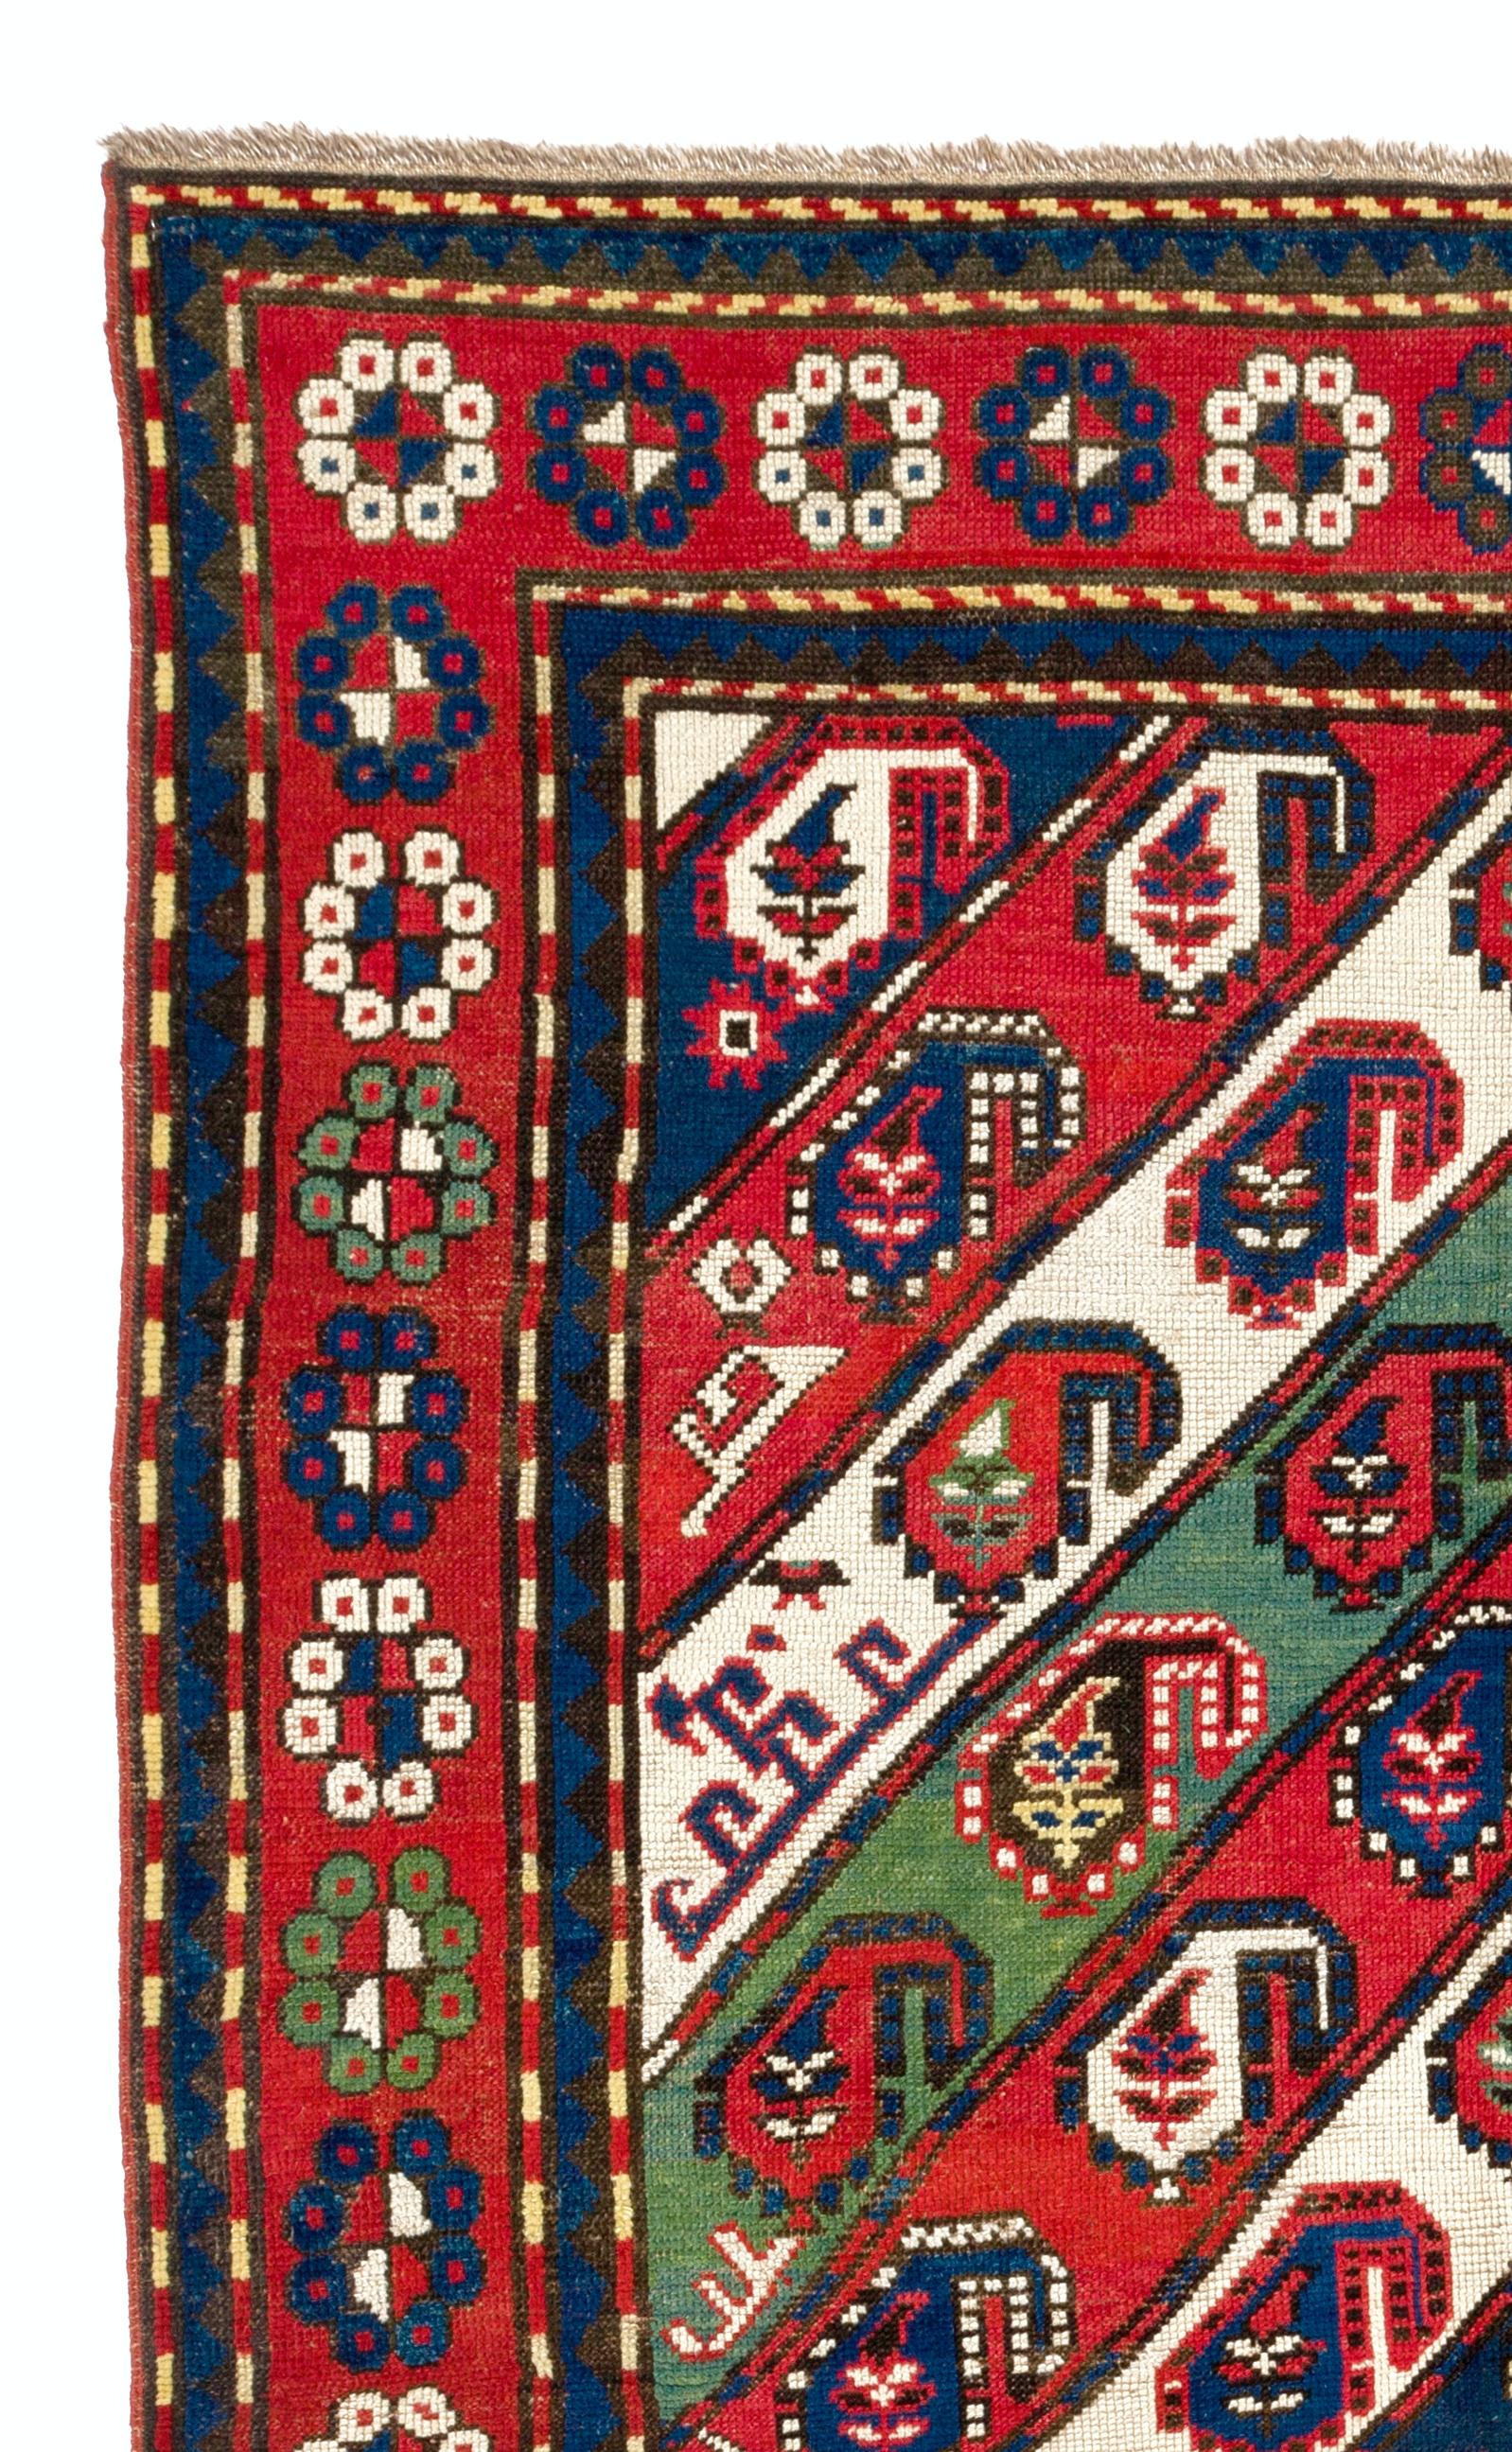 Antique Caucasian Gendje Kazak rug with diagonal stripes decorated with Botehs and other attractive small design elements and with a red border depicting many flowers. Size: 4.4 x 7.3 Ft
100% wool and natural dyes. Good condition. Provenance: A